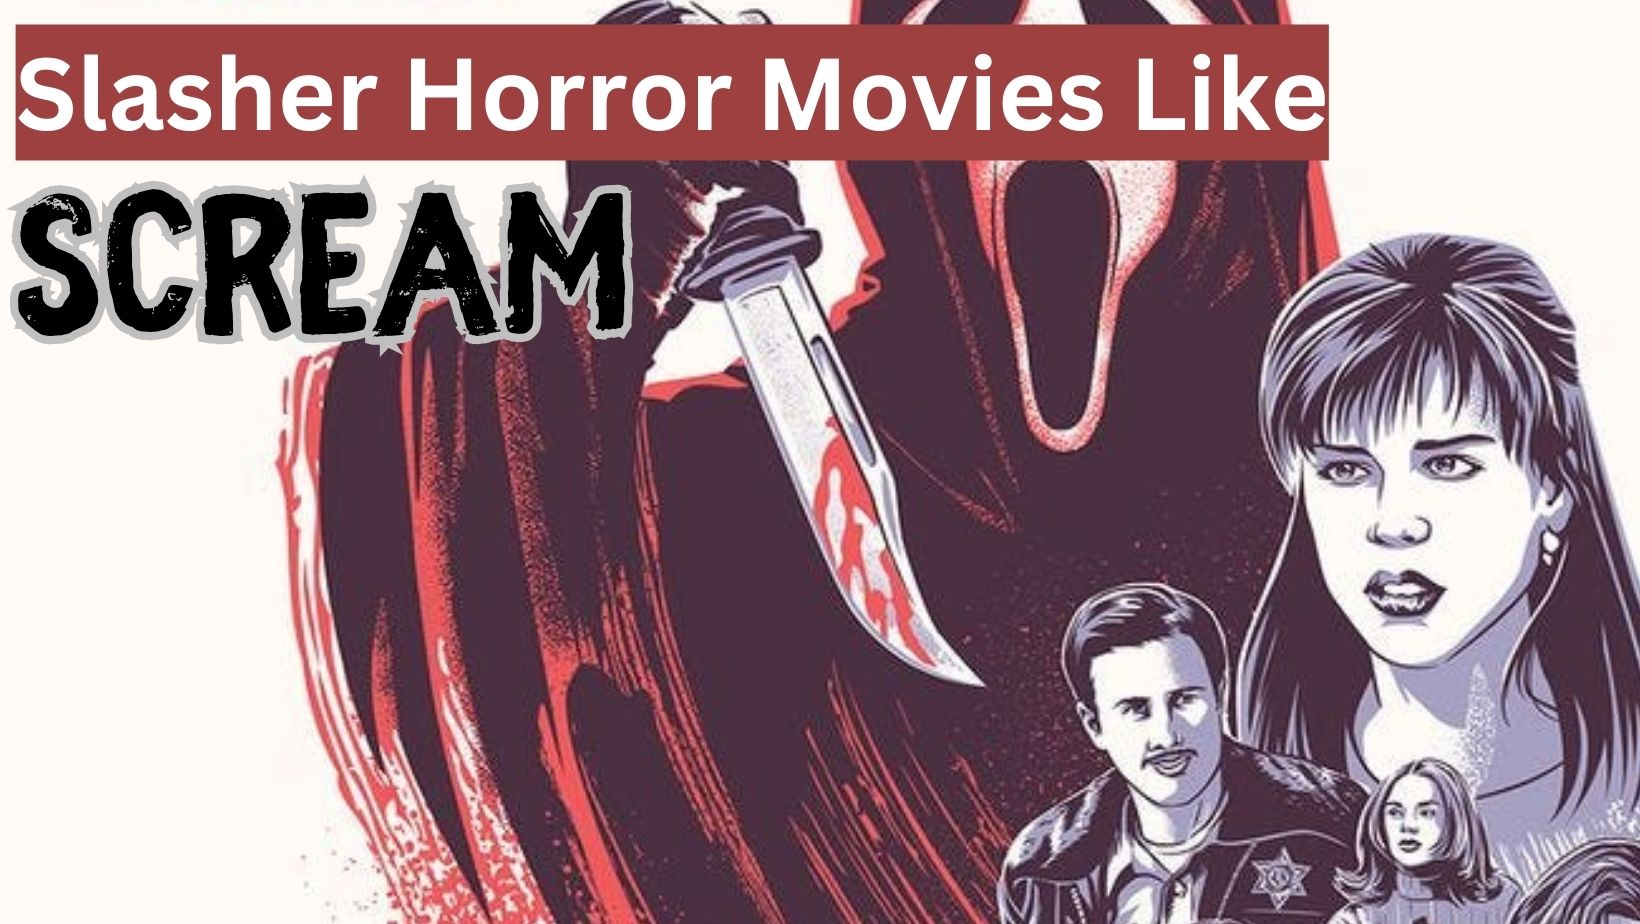 image of ghostface in red cape with bloody knife with charicatures of syndney and other characters in the movies. text "slasher horror movies like scream"